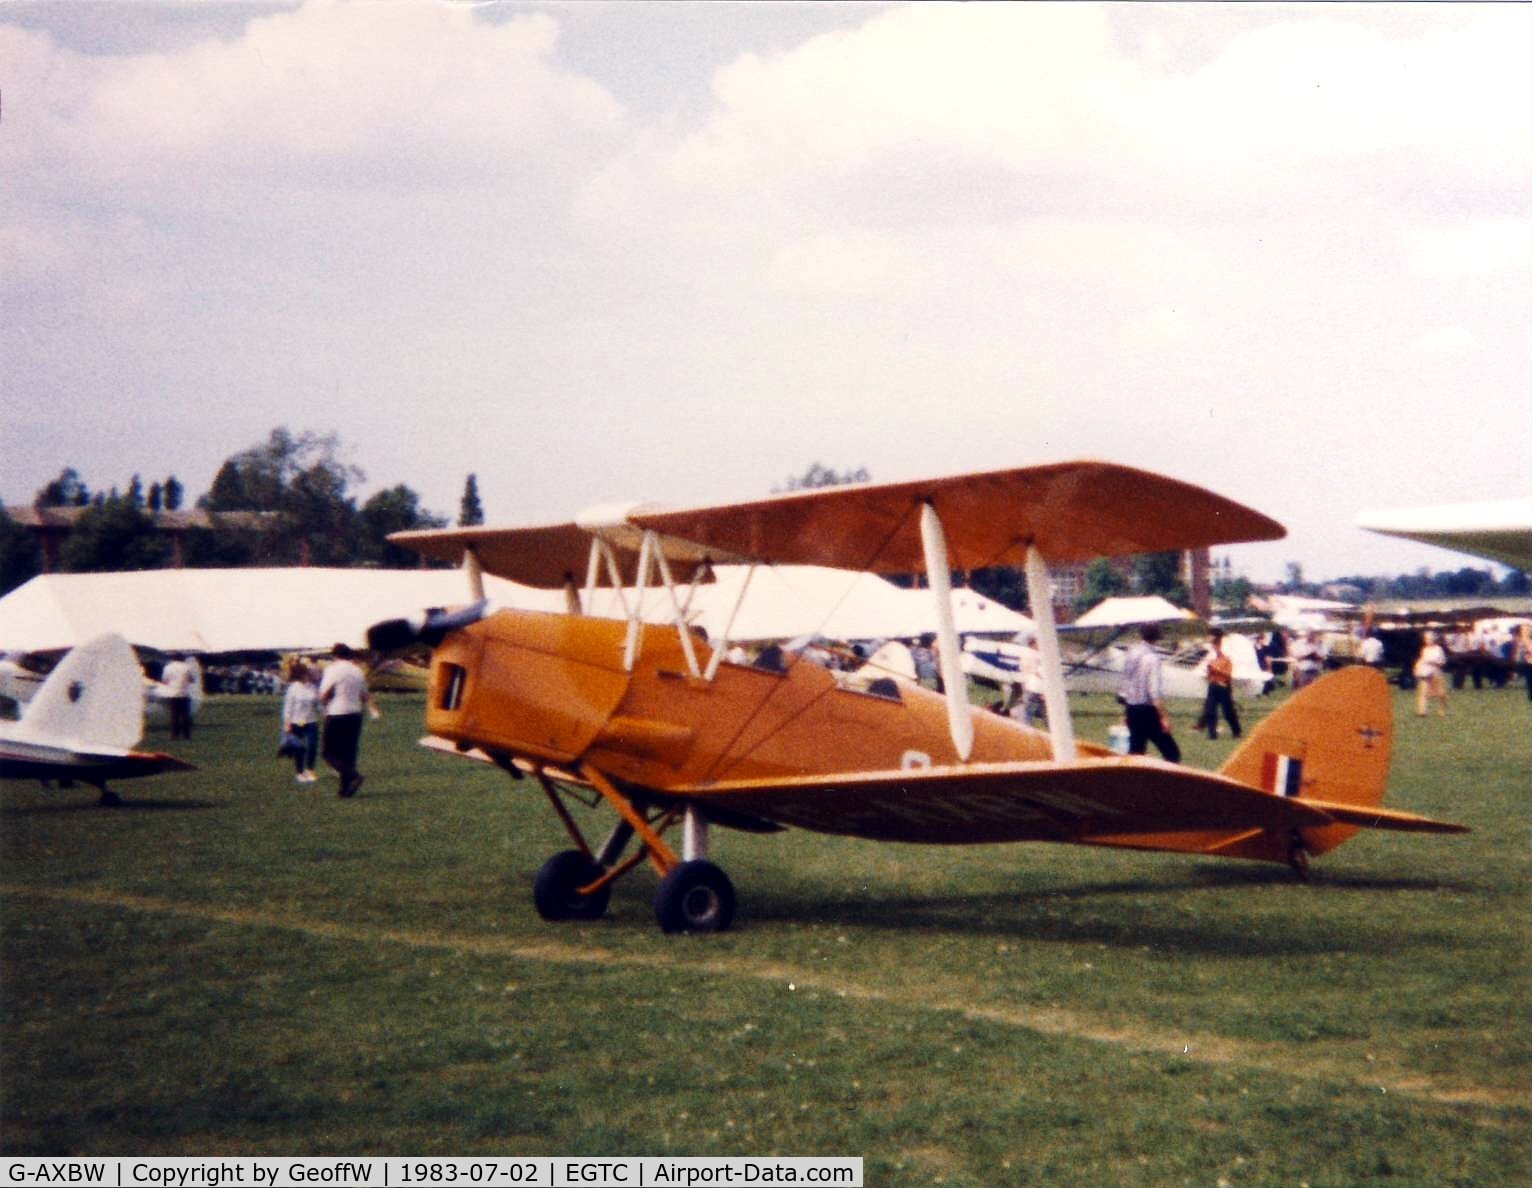 G-AXBW, 1940 De Havilland DH-82A Tiger Moth II C/N 83595, DH-82A Tiger Moth G-AXBW attending the 1983 PFA Rally at Cranfield